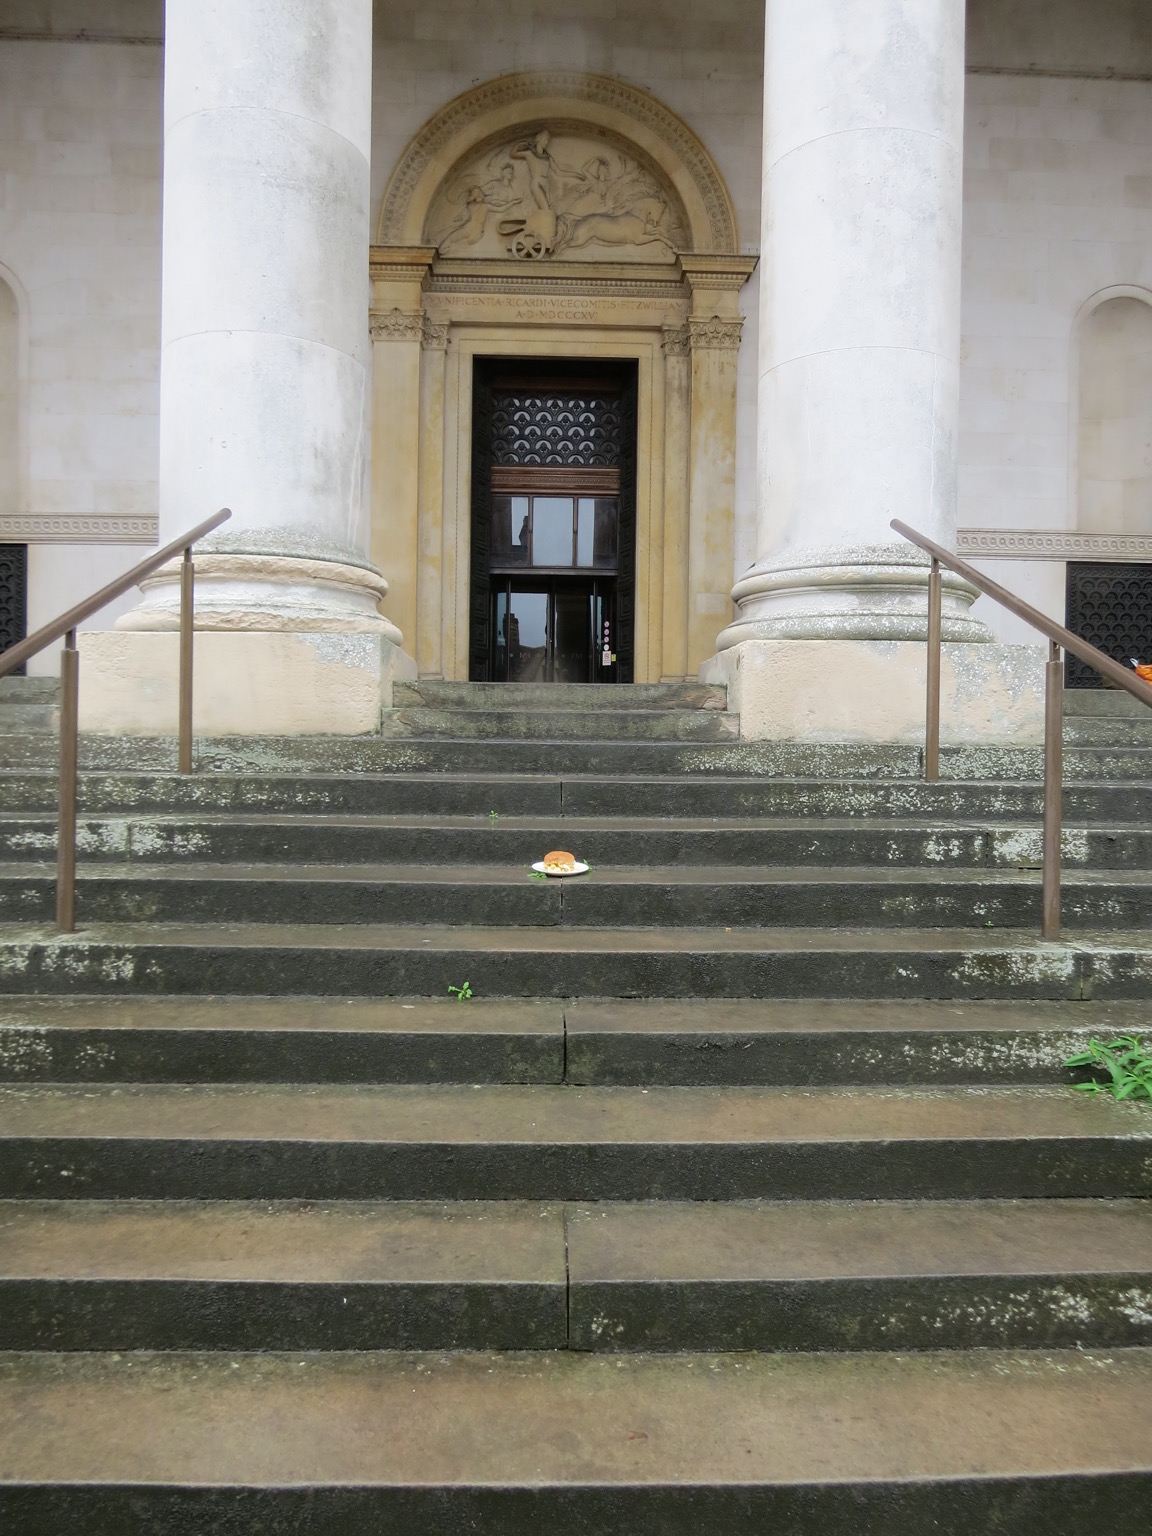 Quavers roll on steps in front of columns and doorway